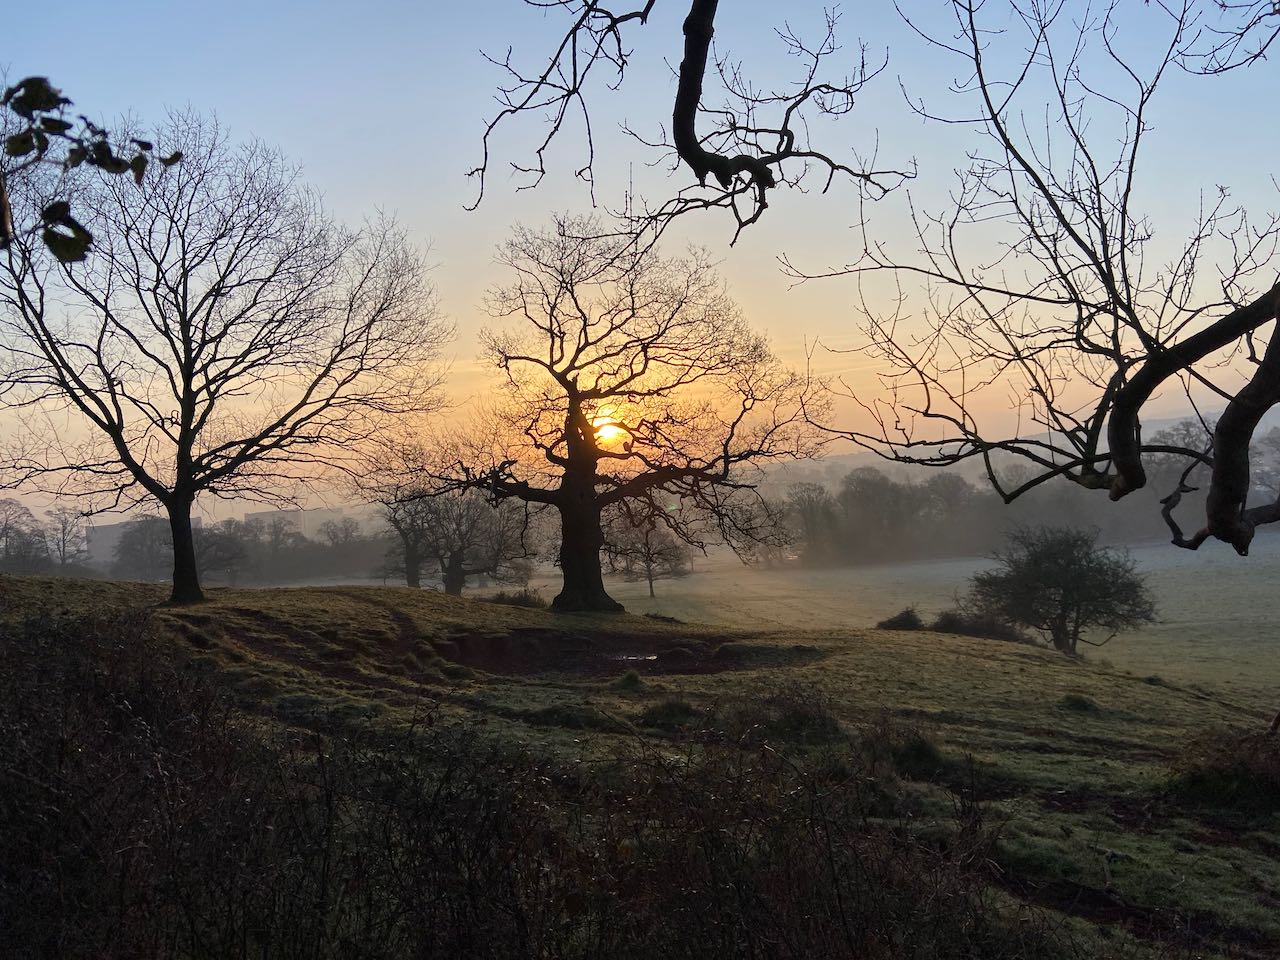 The sun rises behind a tree on a frosty day